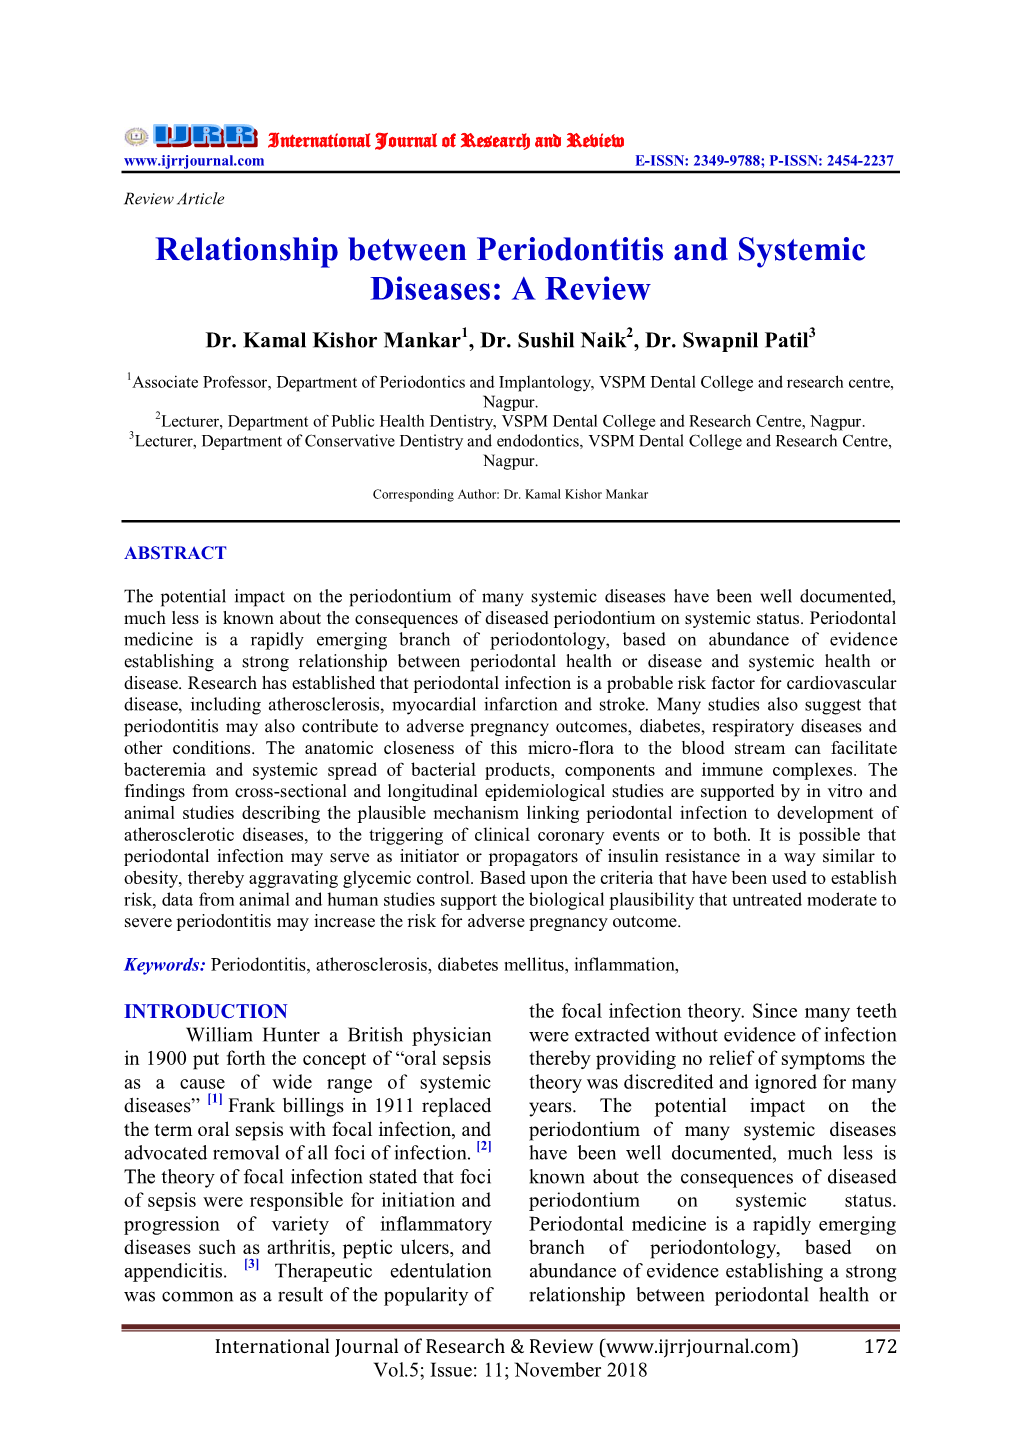 Relationship Between Periodontitis and Systemic Diseases: a Review